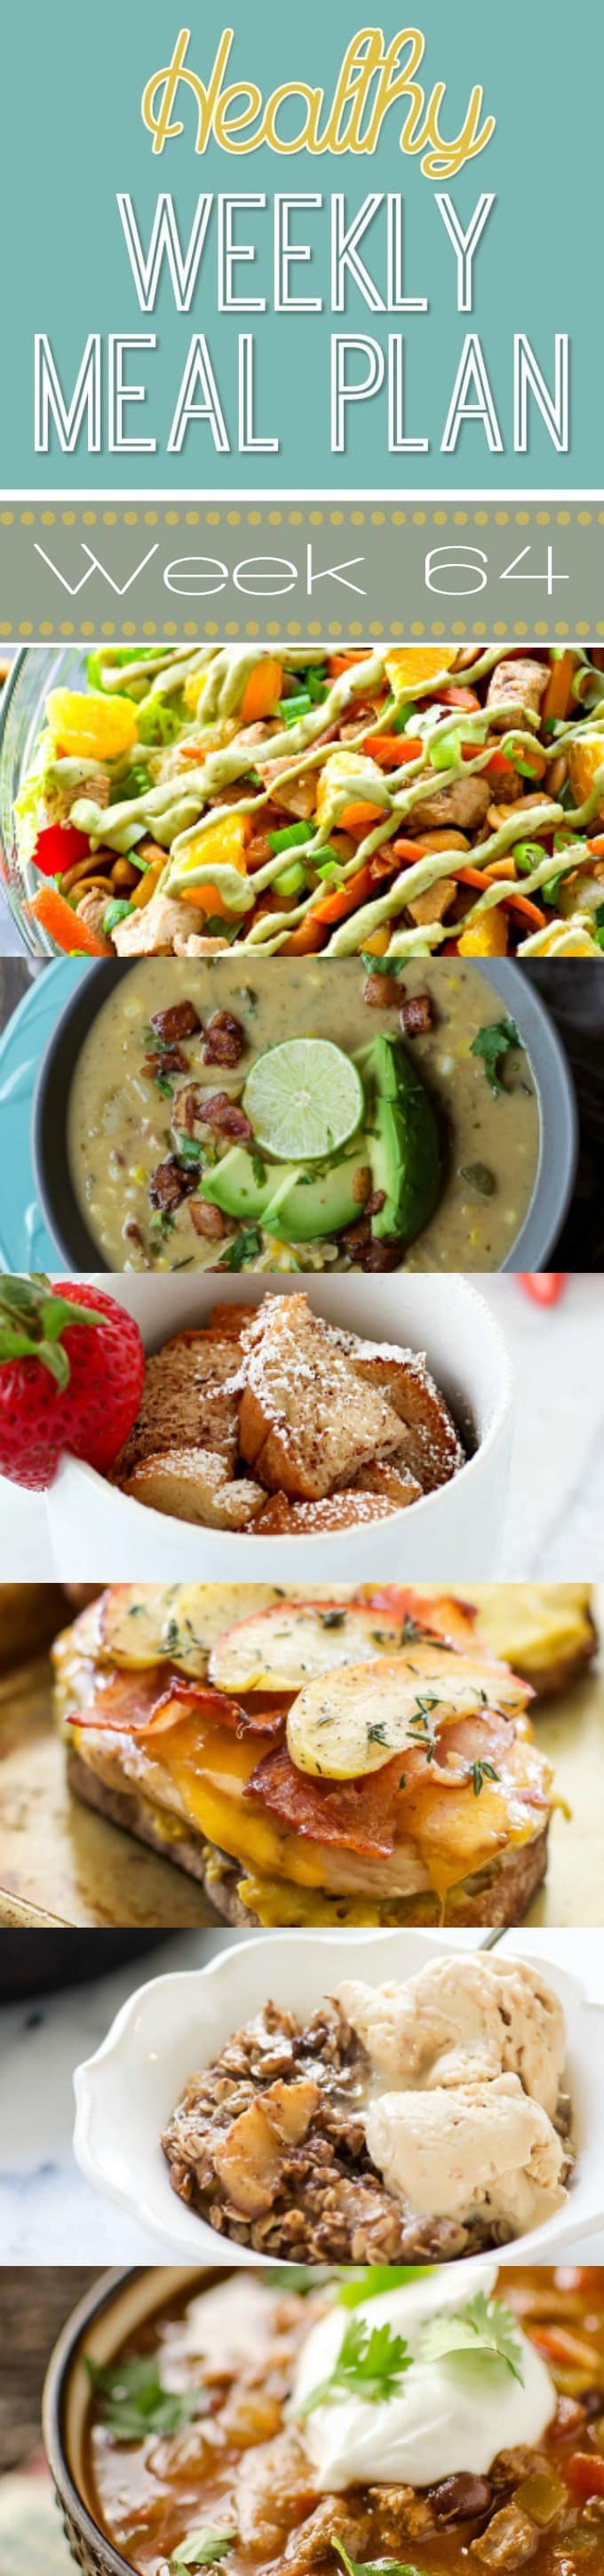 Healthy Weekly Meal Plan #64 - plan out your healthy dinners for the week! Plus we've thrown in a healthy breakfast, lunch, snack and dessert recipe, too! Can't wait for you to try these recipes!